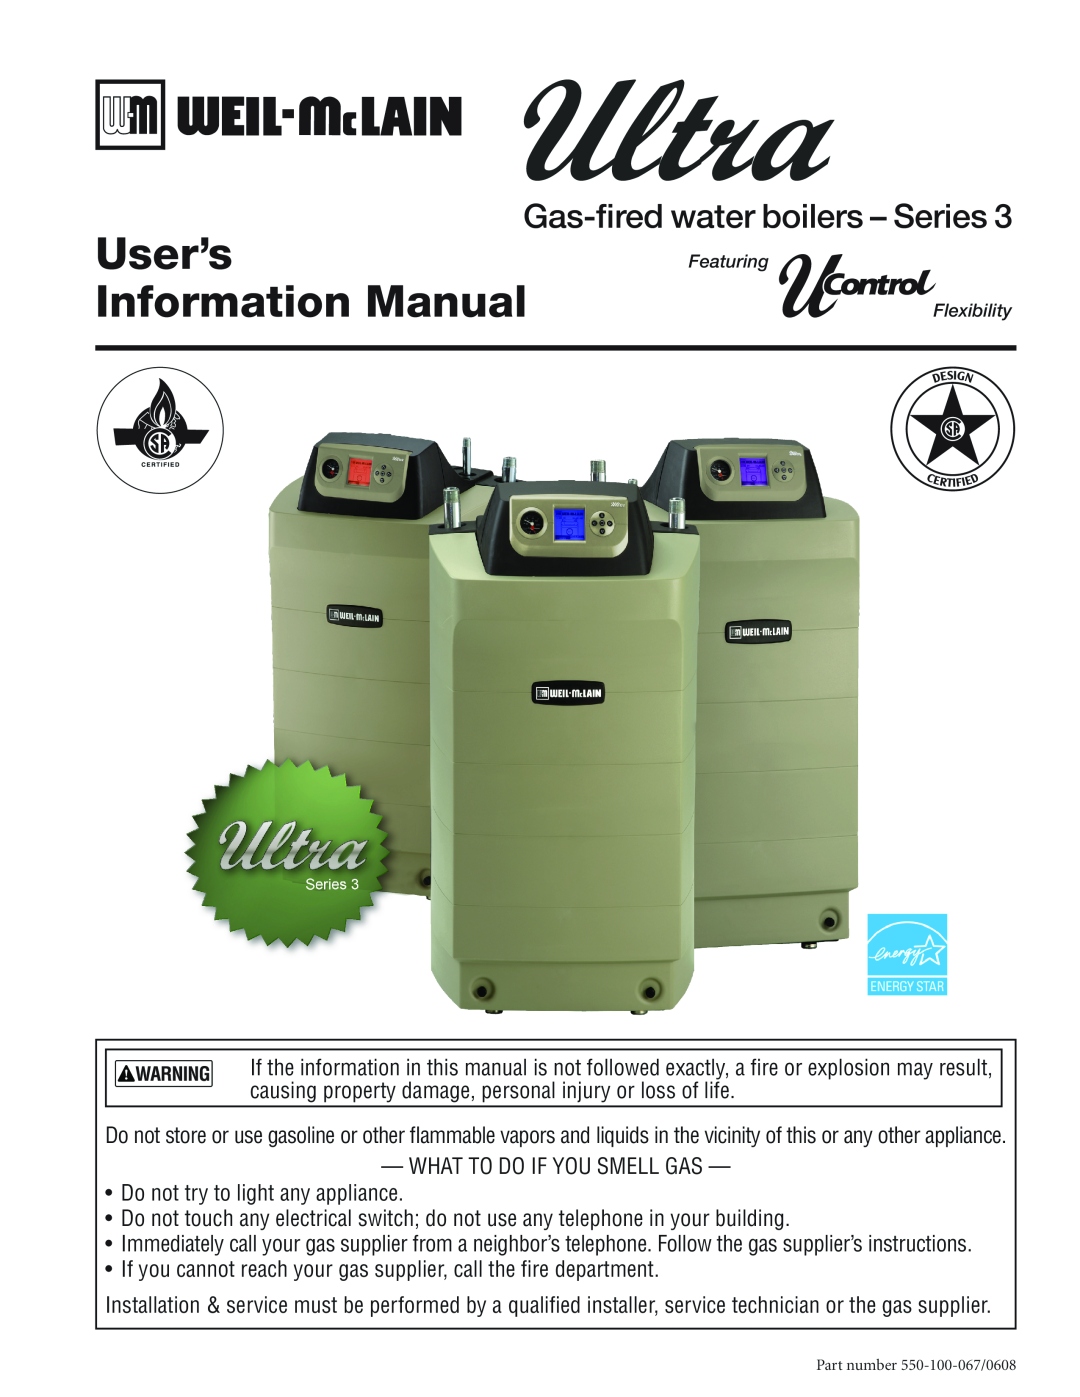 Weil-McLain 550-100-067/0608 manual User’s, Information Manual, Gas-firedwater boilers - Series 